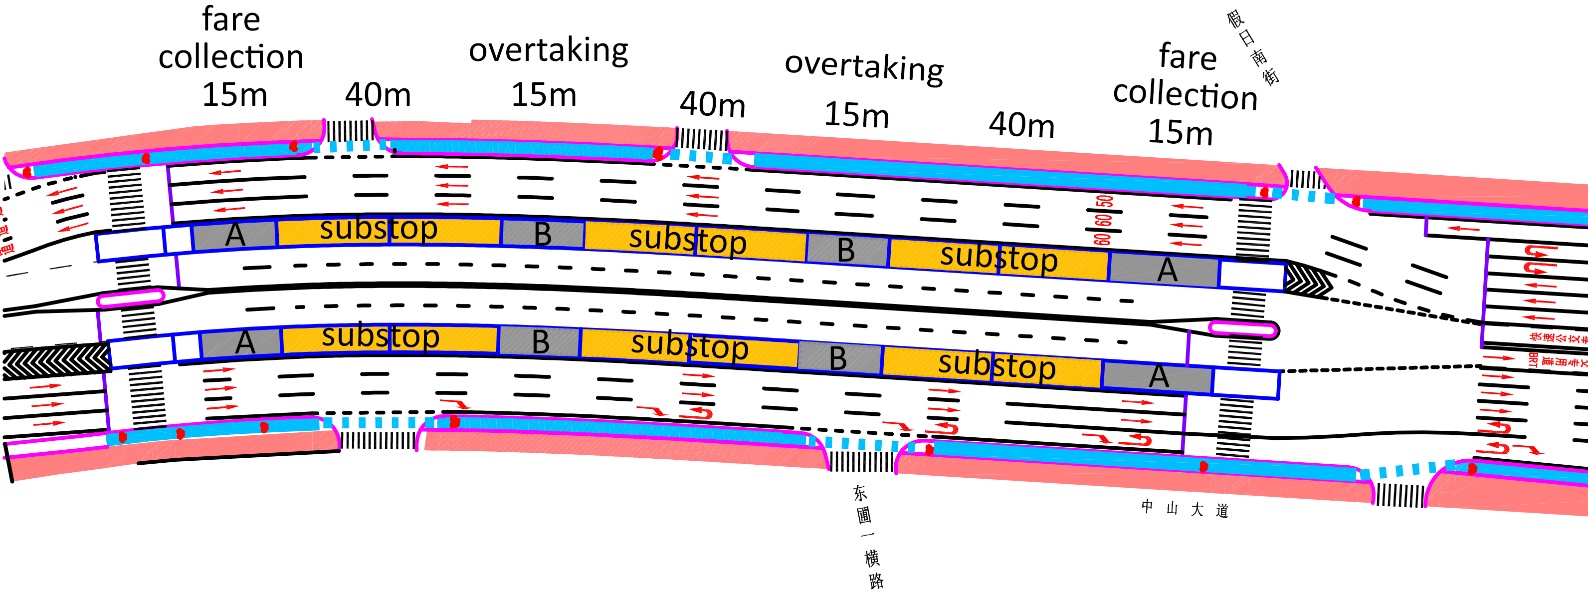 Fig. 25.14 Dongpu BRT station in Guangzhou in plan view shows more clearly the parts of the station, which consists of 3 sub-stops in each direction, with a total length of 180m. Each sub-stop consists of 2 docking bays for 18m BRT buses, or 3 sub-stops for 12m BRT buses. A = fare collection and B = passing area. The platform is 5m wide.